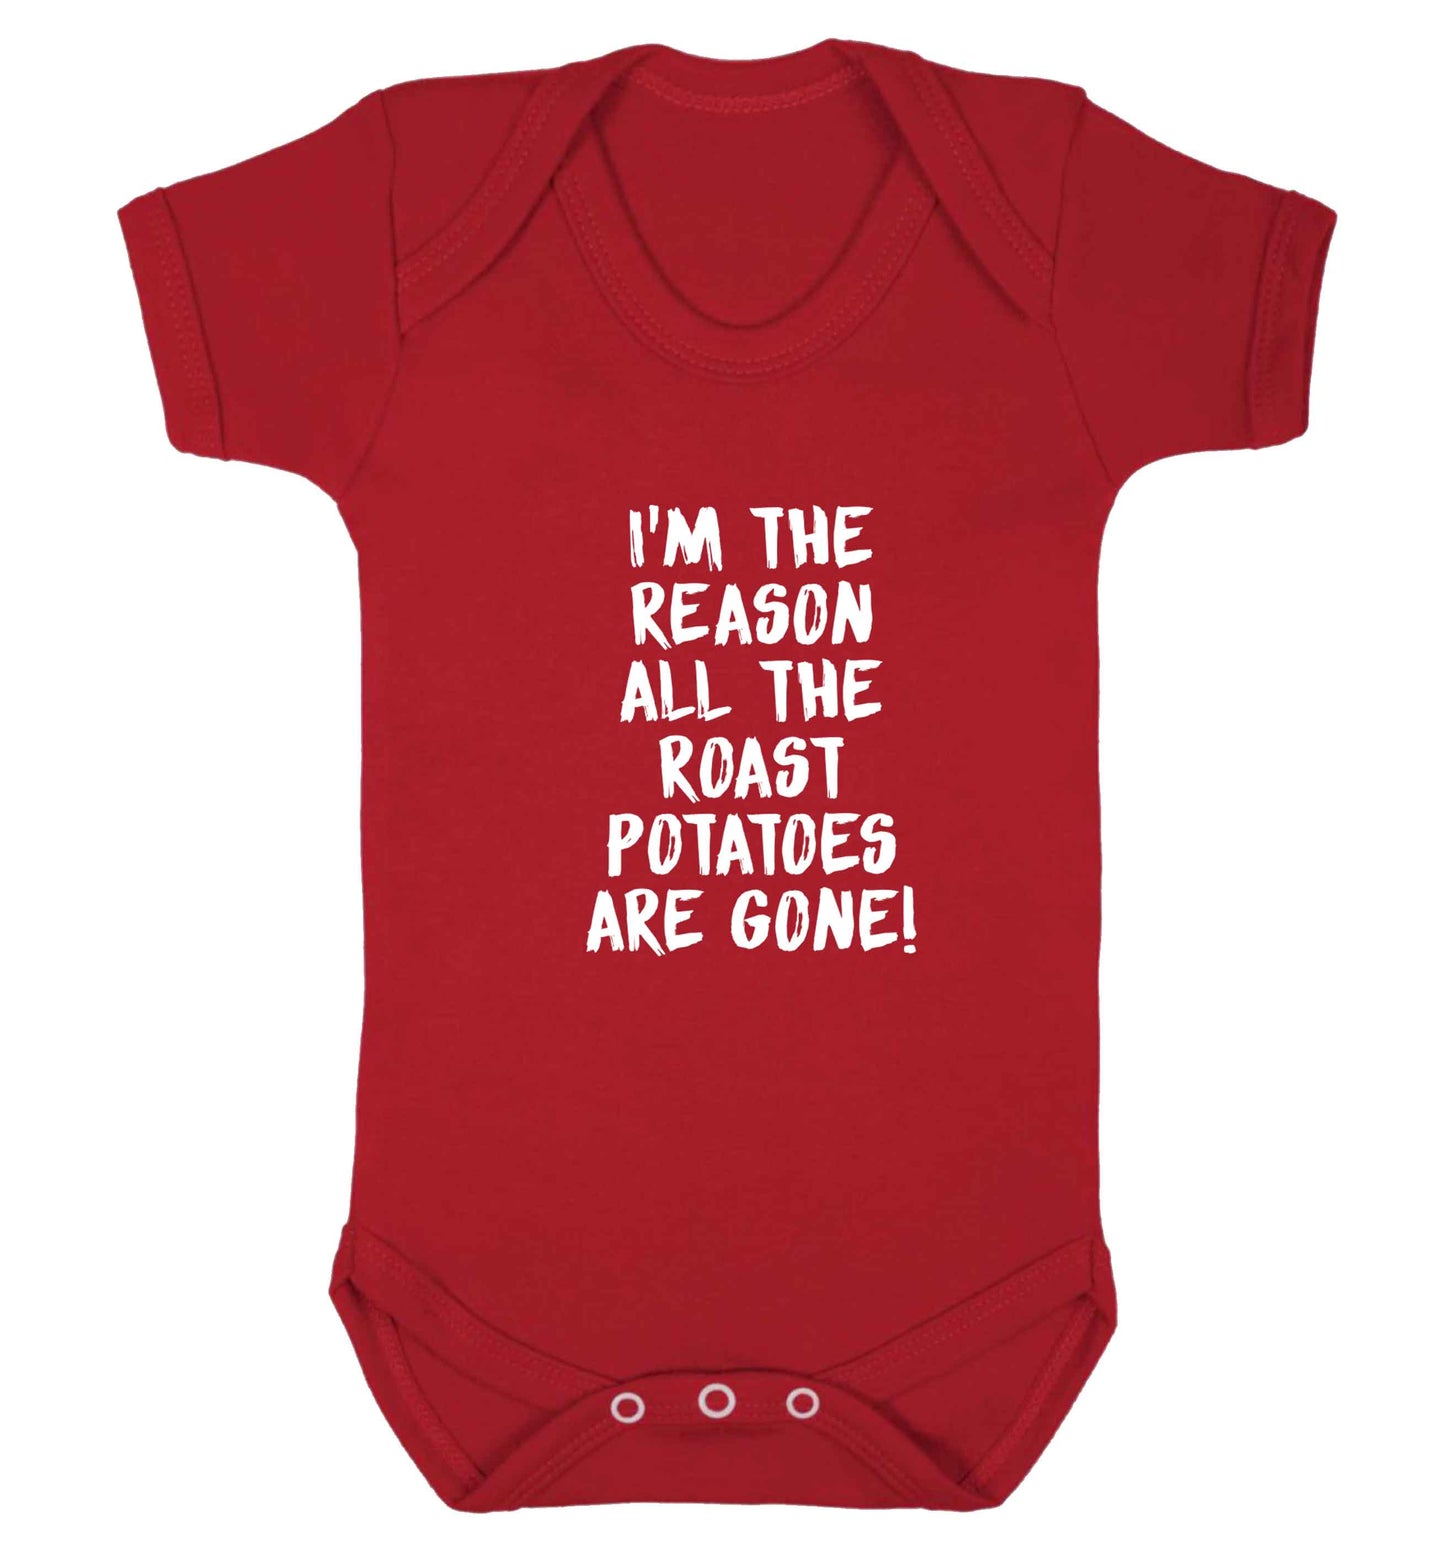 I'm the reason all the roast potatoes are gone baby vest red 18-24 months